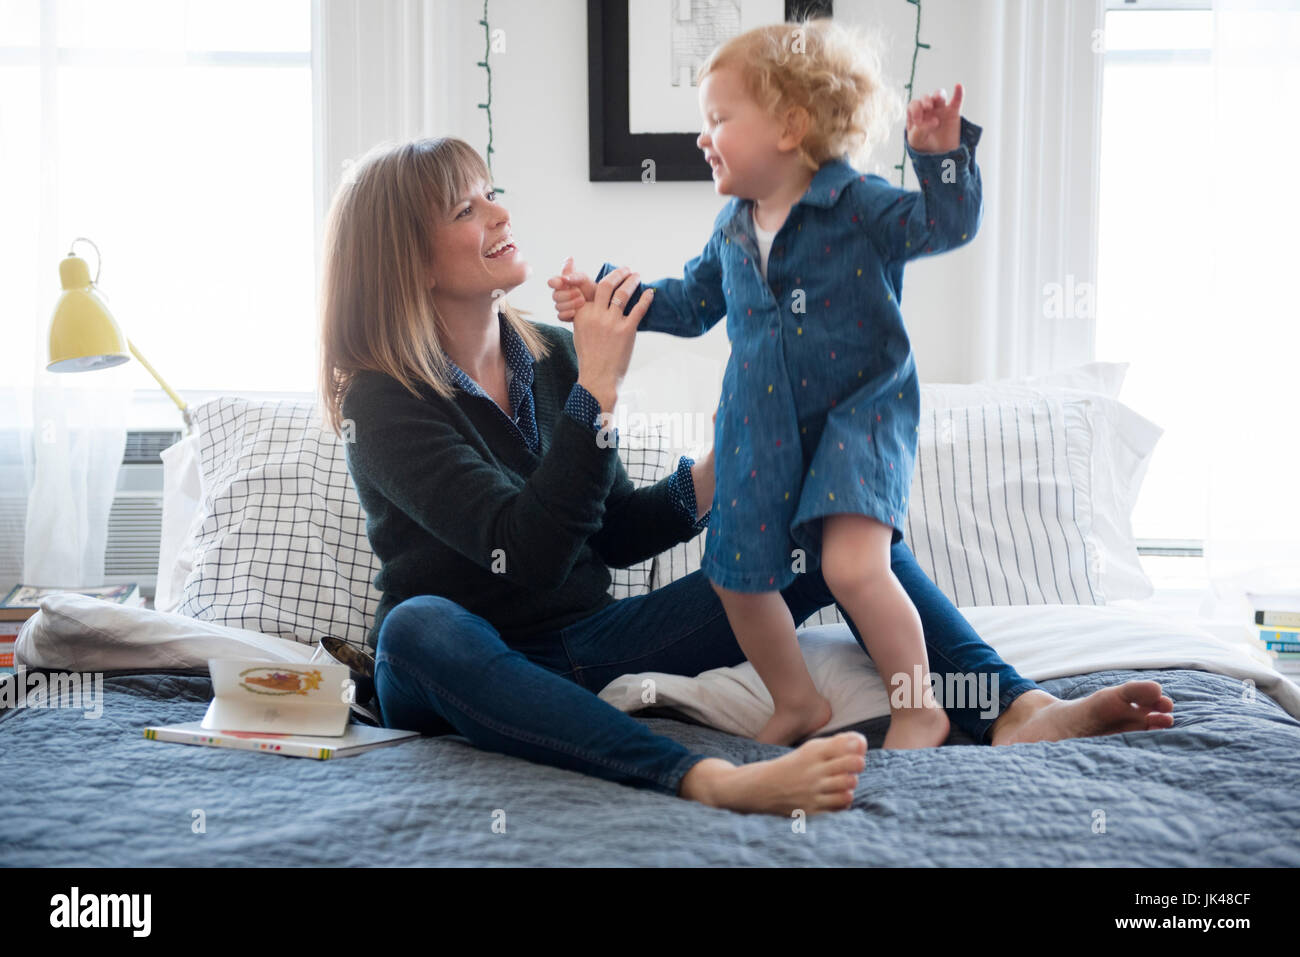 Caucasian mother sitting on bed playing with daughter Stock Photo